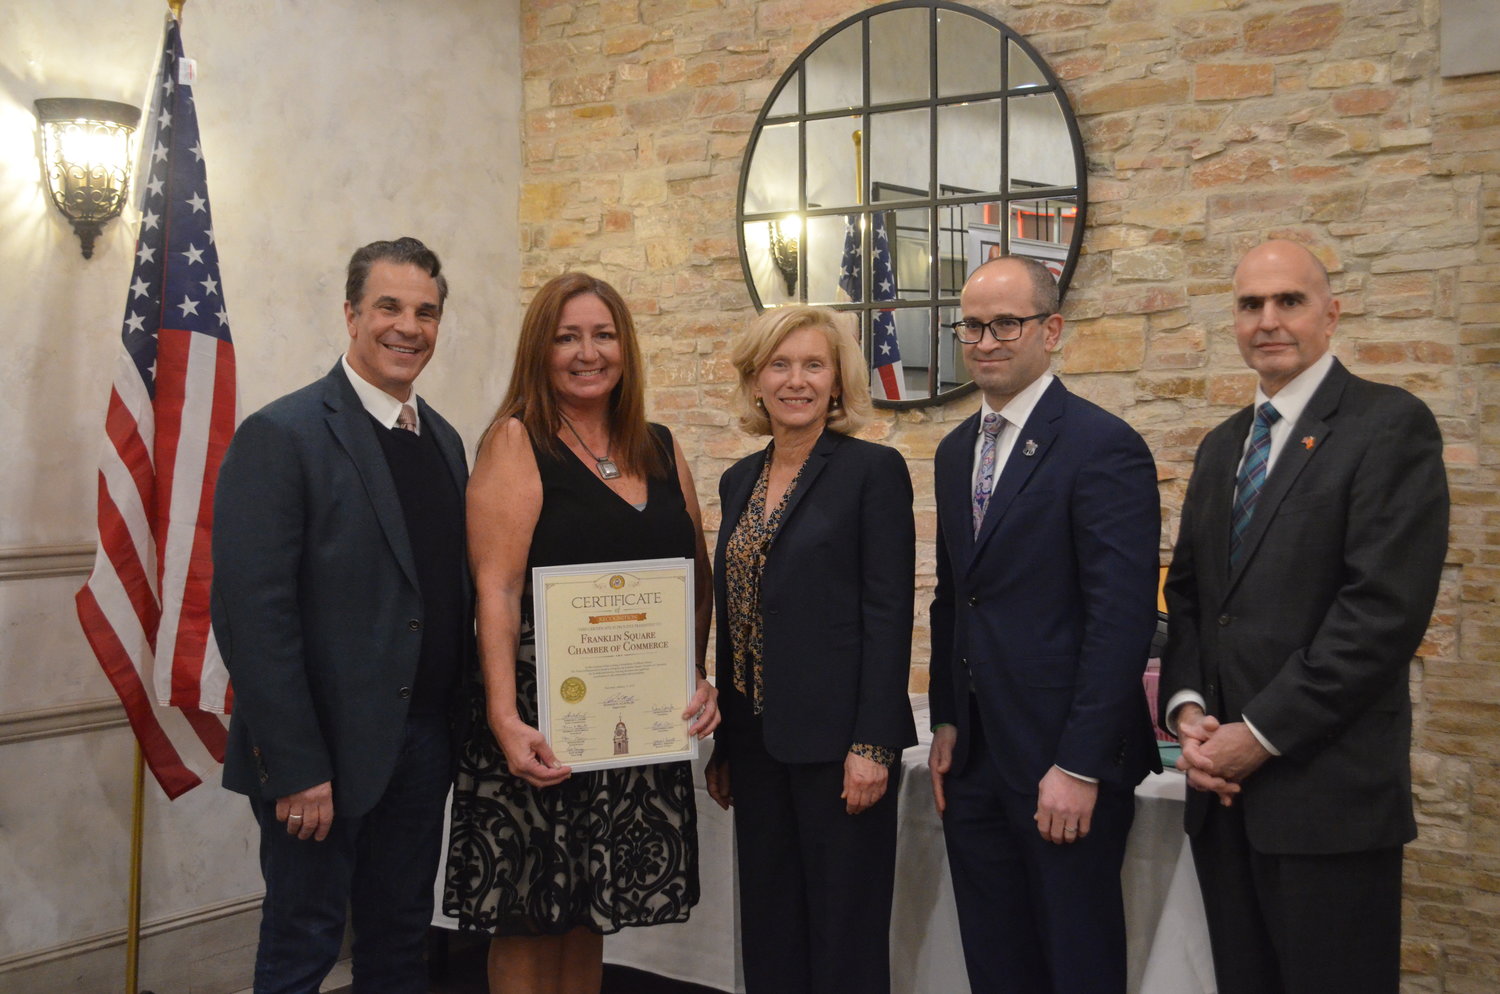 Elected officials presented Chamber President Lisa DelliPizzi, second from left, with a certificate of recognition. With her, from left, were Hempstead Town Councilman Tom Muscarella, Nassau County Comptroller Elaine Phillips, Assemblyman Ed Ra and County Legislator John Guiffrè.